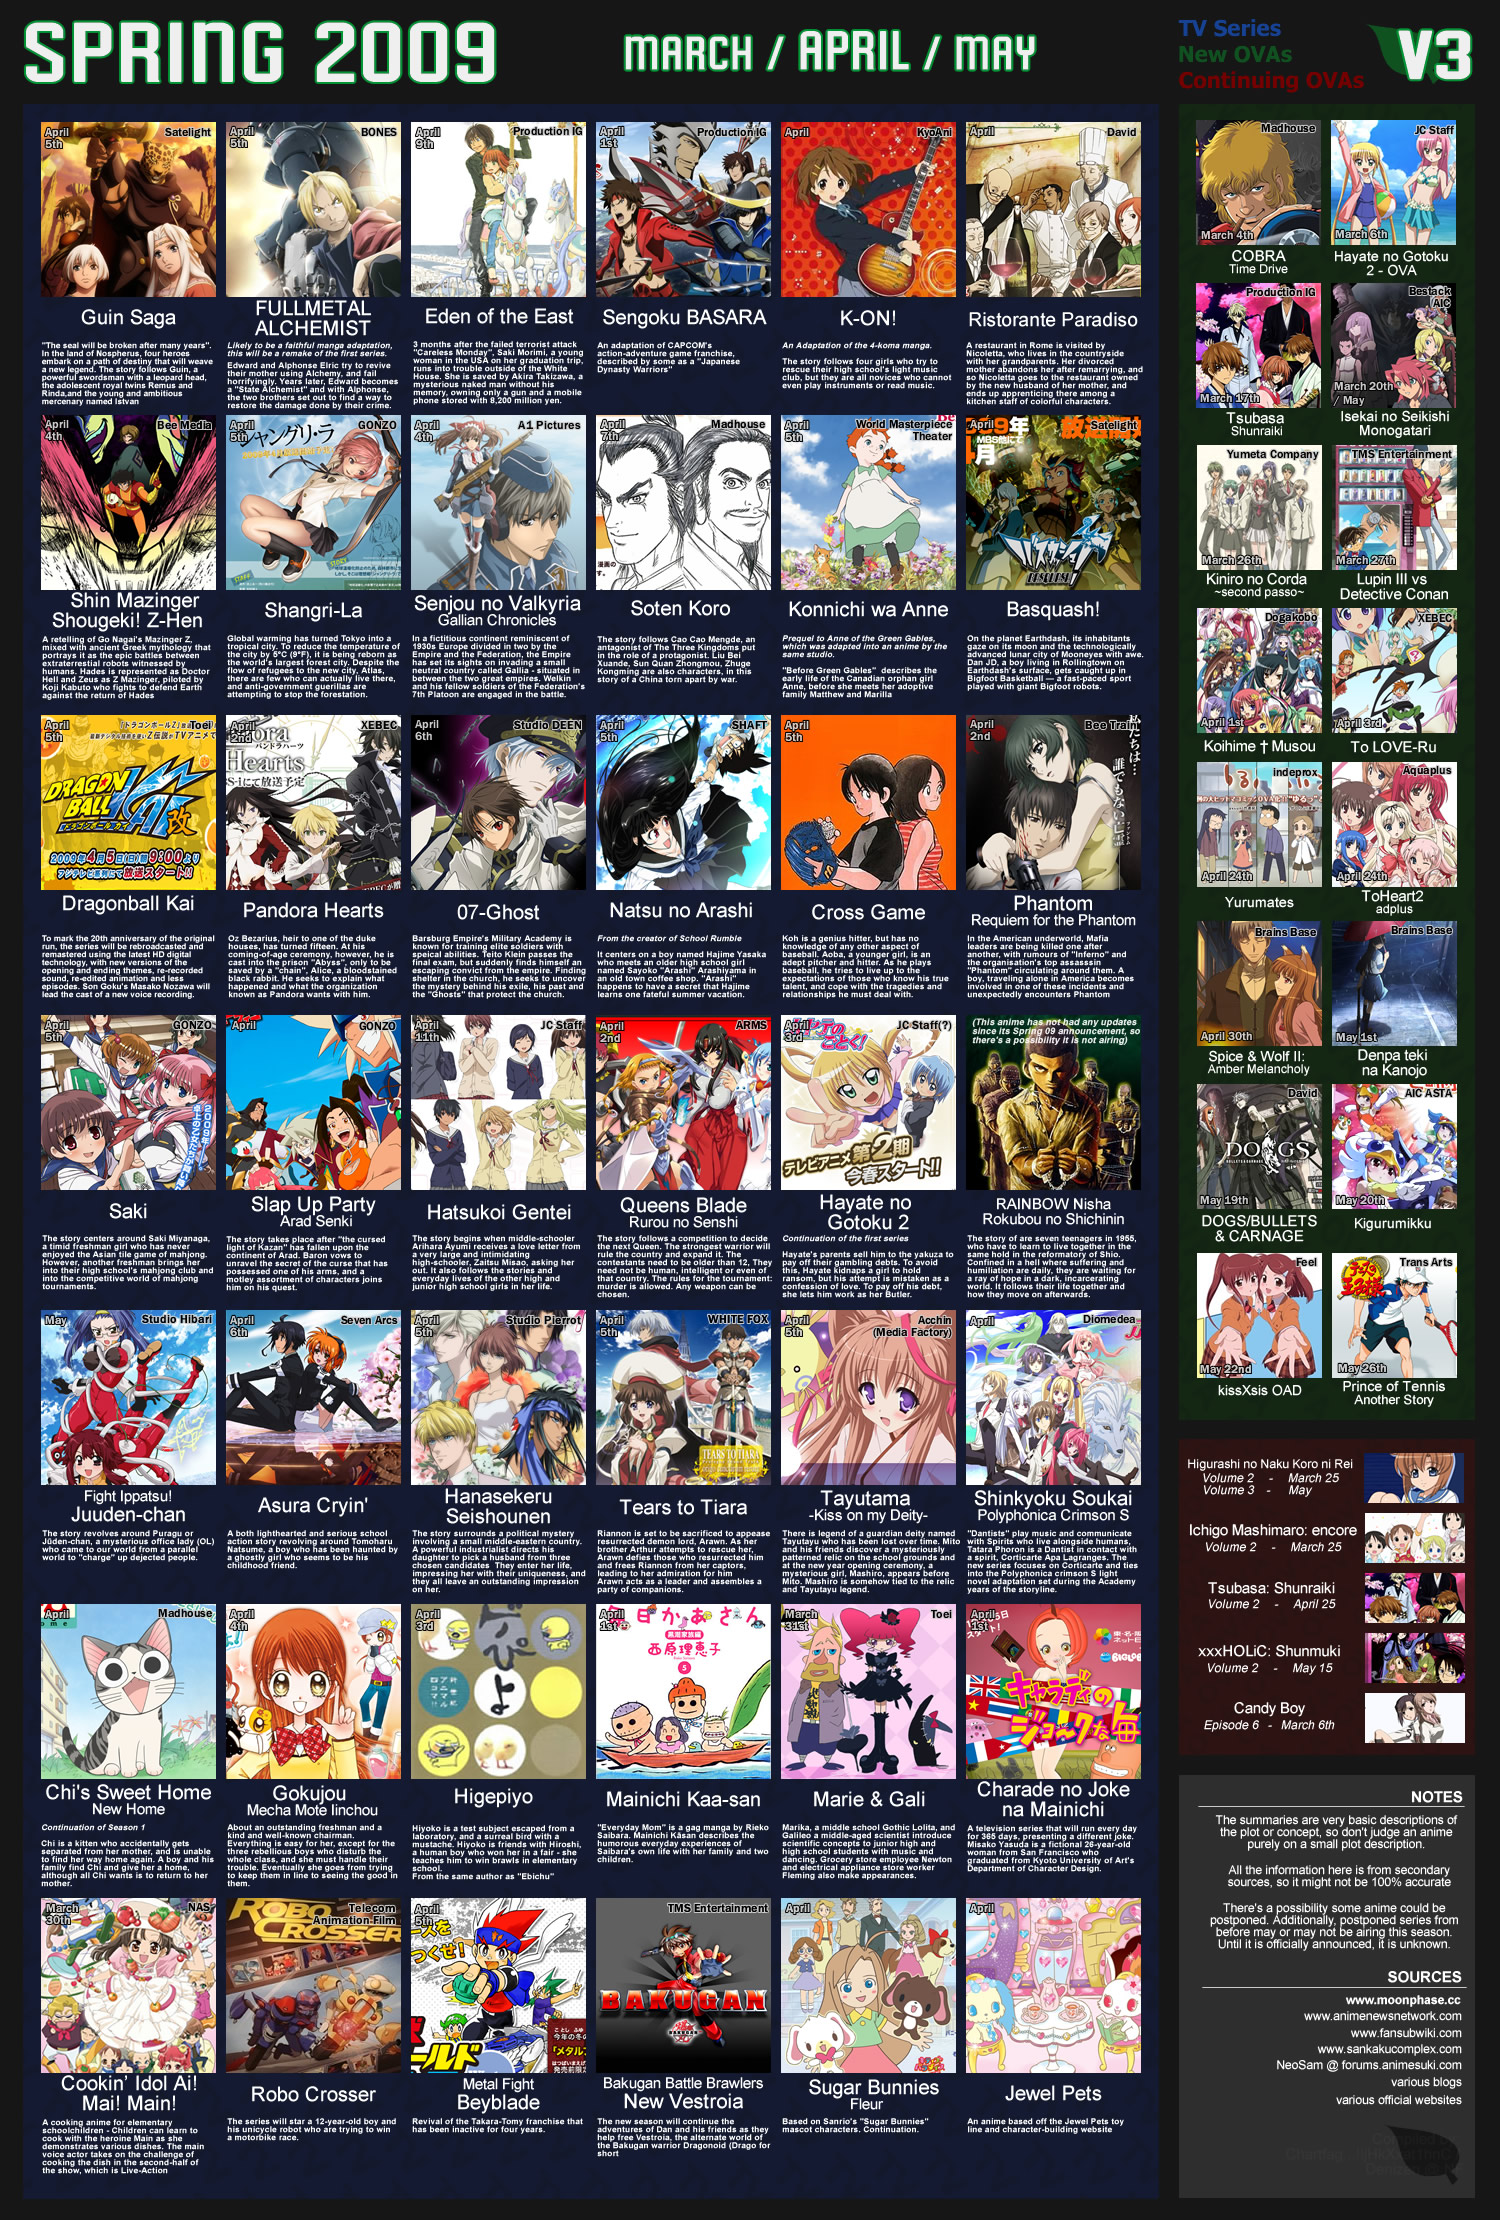 Only the old otaku remember this - Forums 